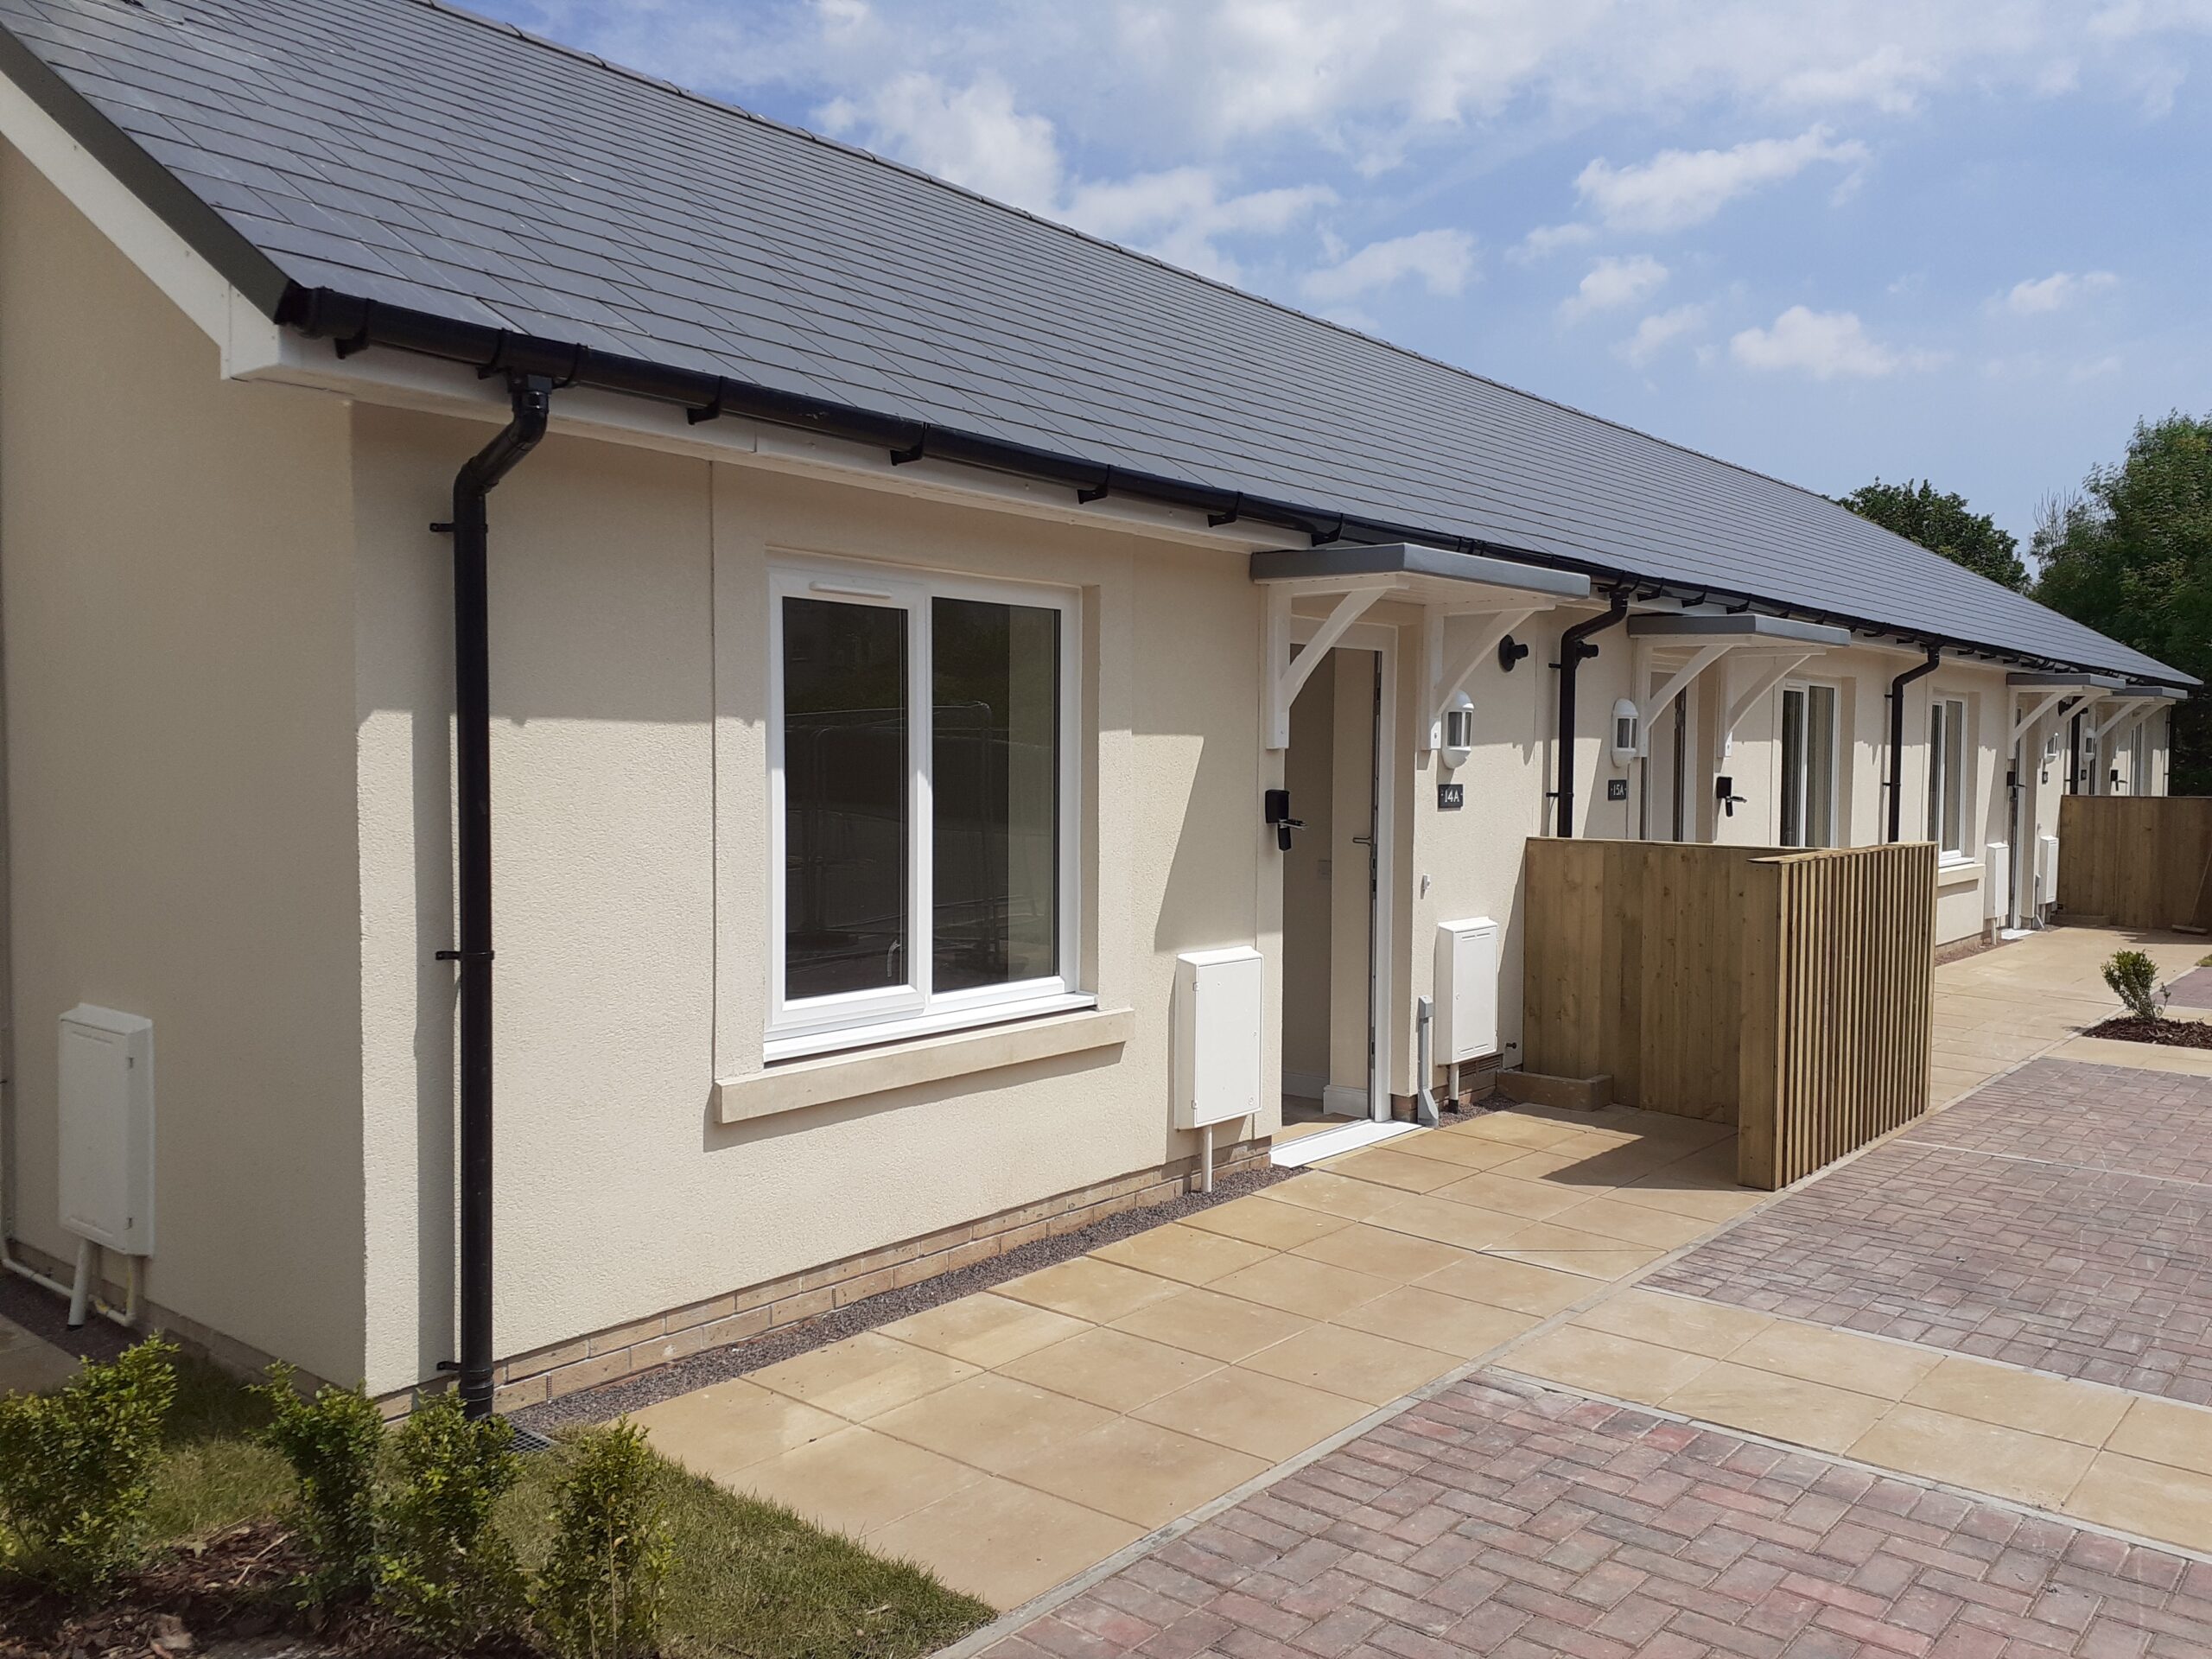 External photo of light cream bungalows with black rooves